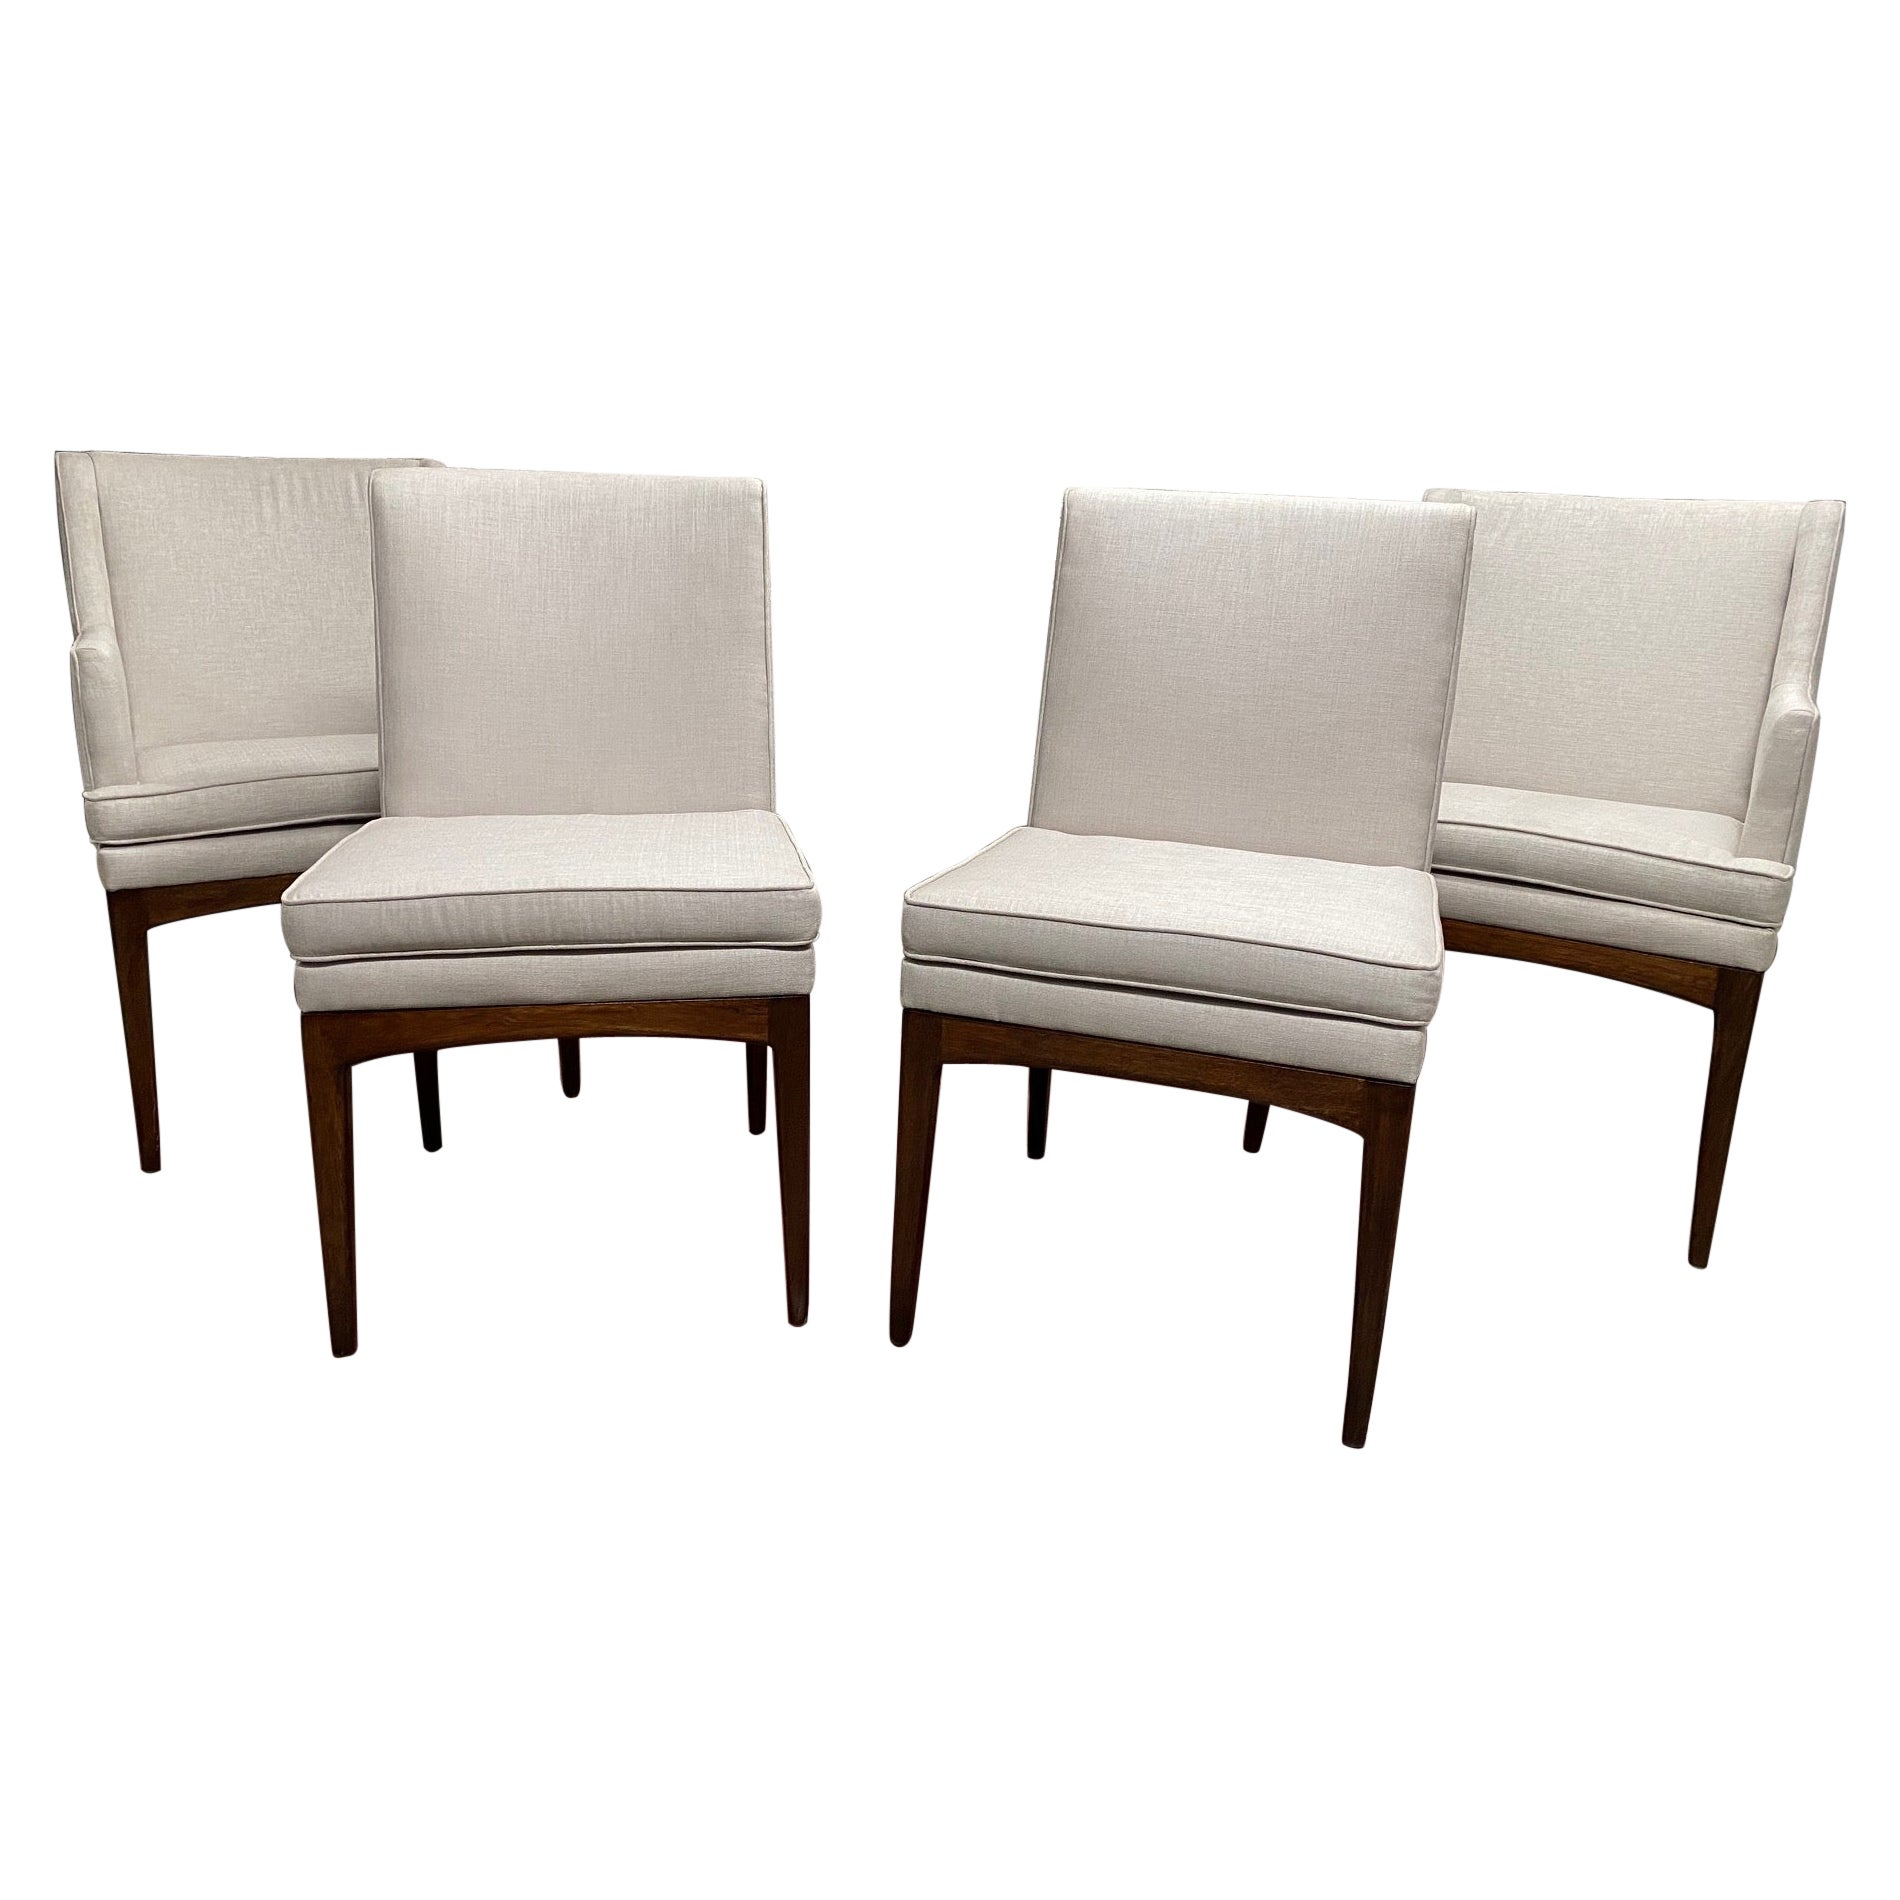 Flair Furniture Dining Room Chairs